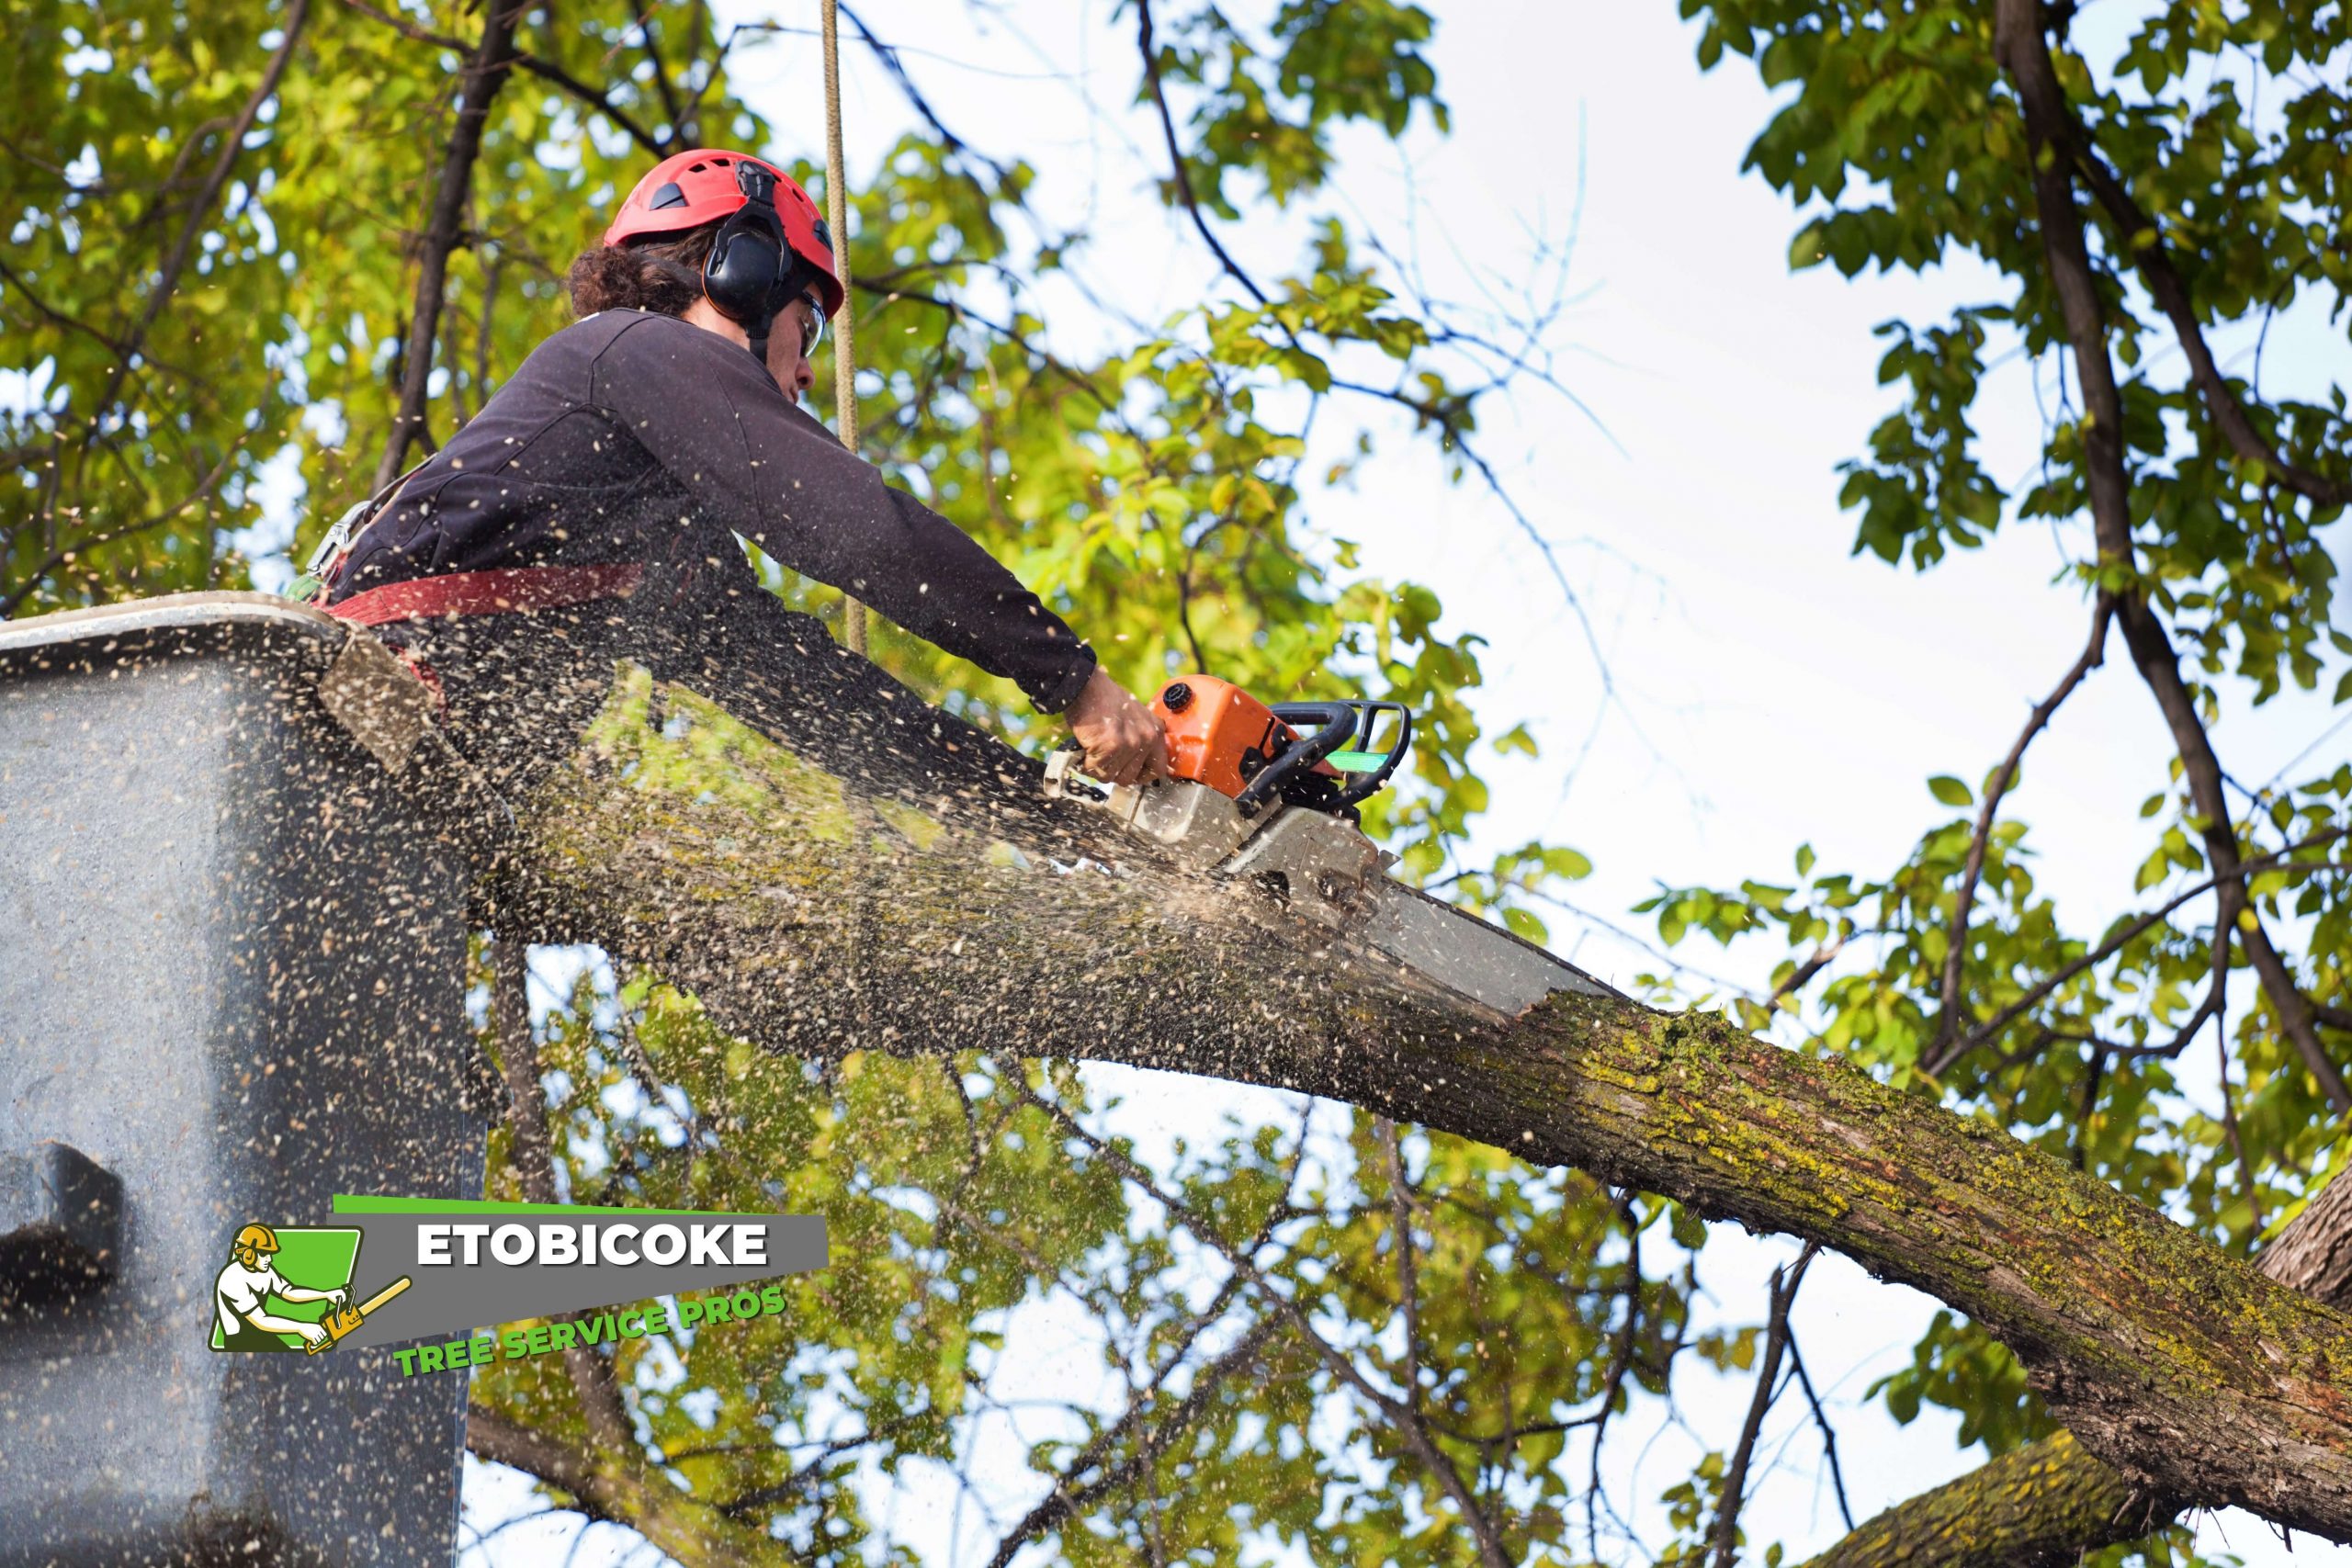 An image of tree limb removal in Etobicoke